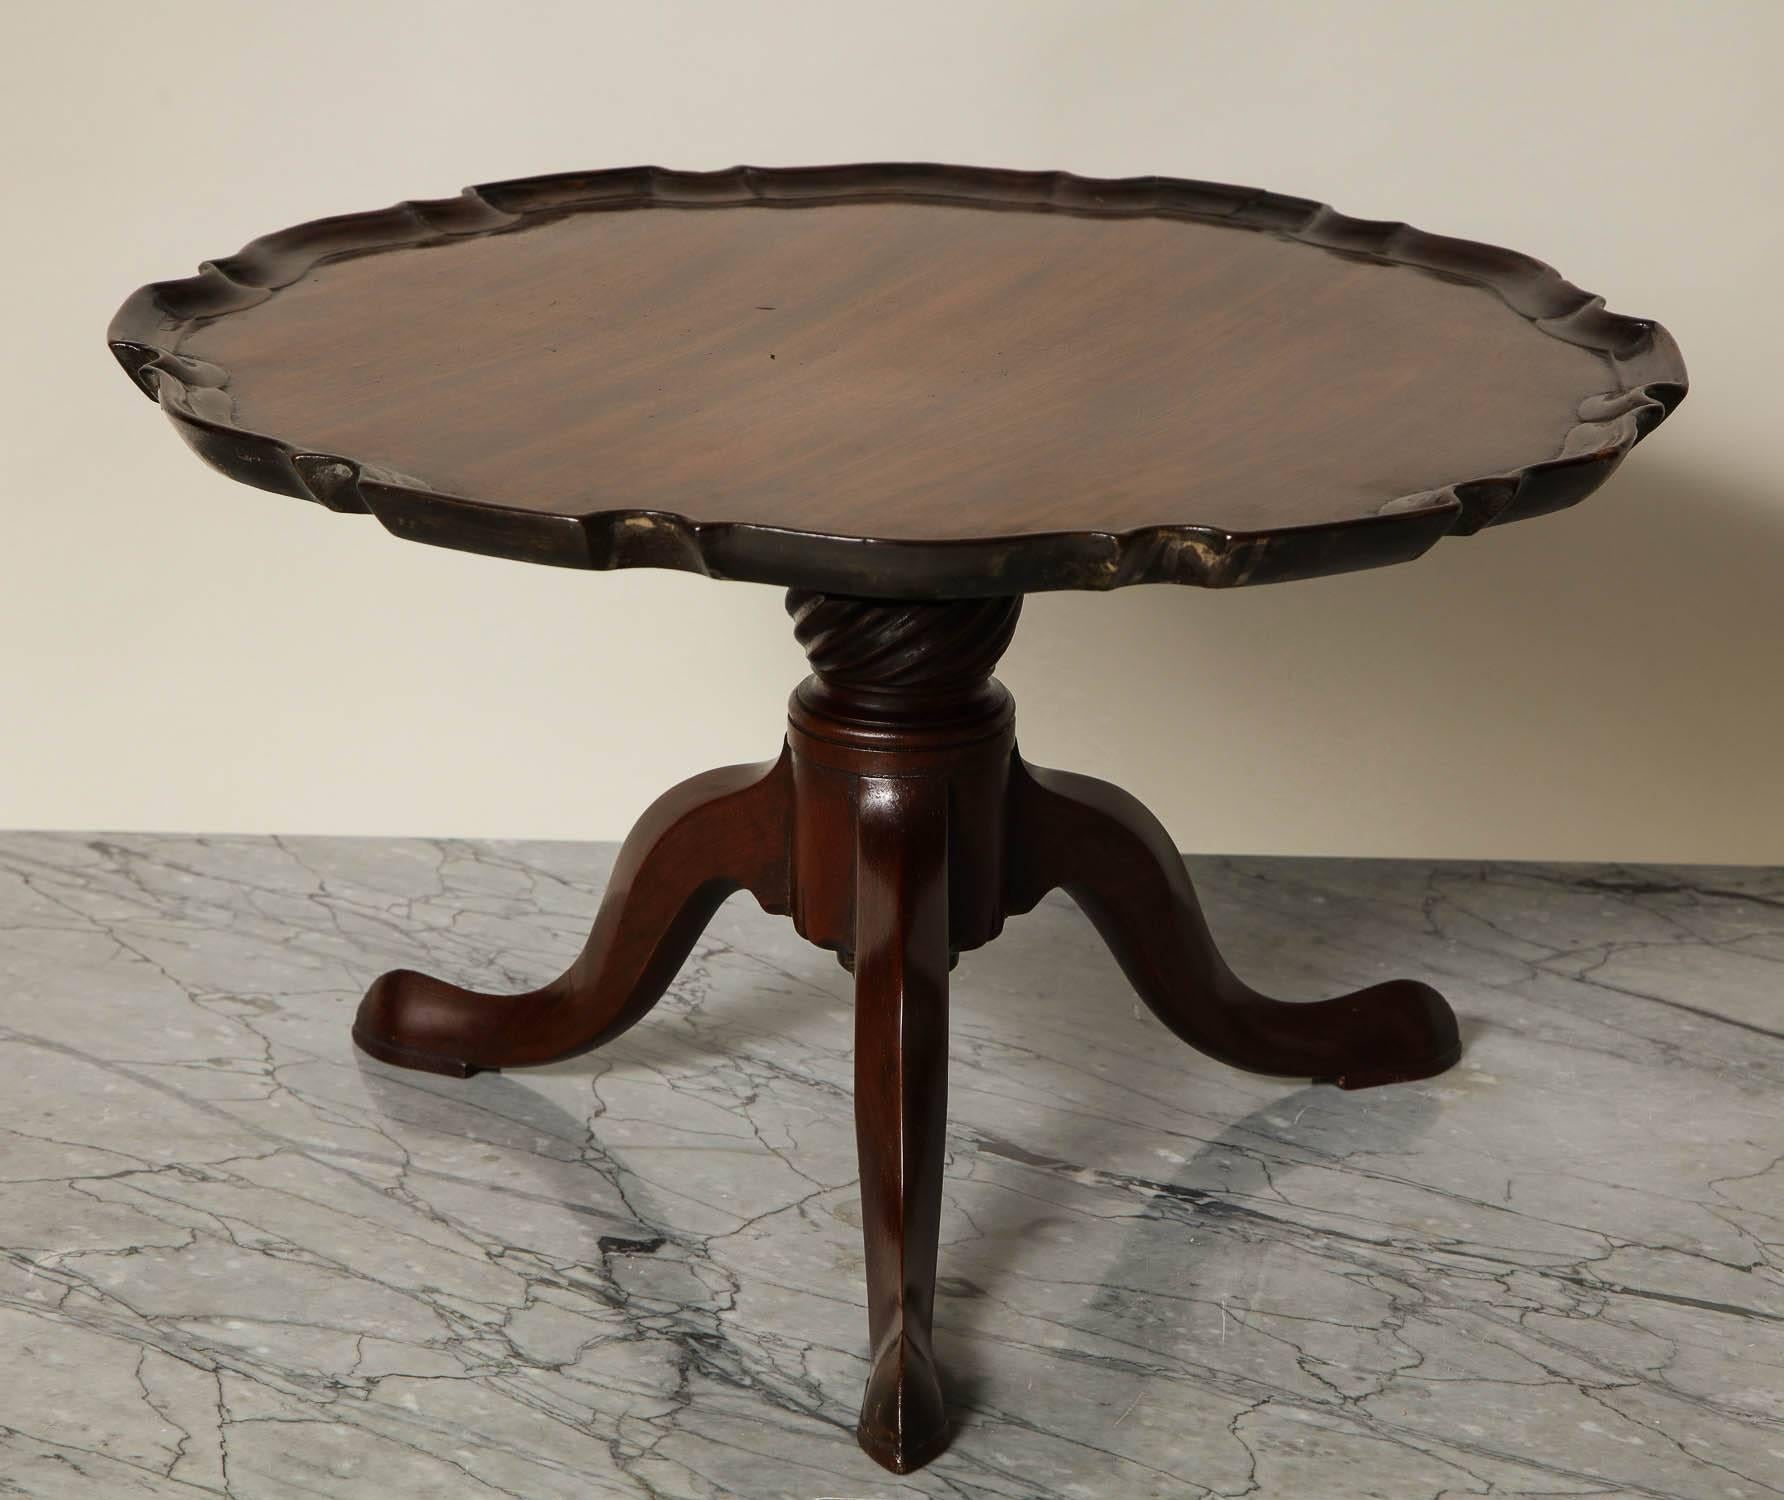 Most unusual George III mahogany Lazy Susan, the piecrust scalloped top fashioned from a single and well figured plank, over revolving shaft with spiral fluted turning, standing on tripod base with slipper feet, the whole possessing good rich color